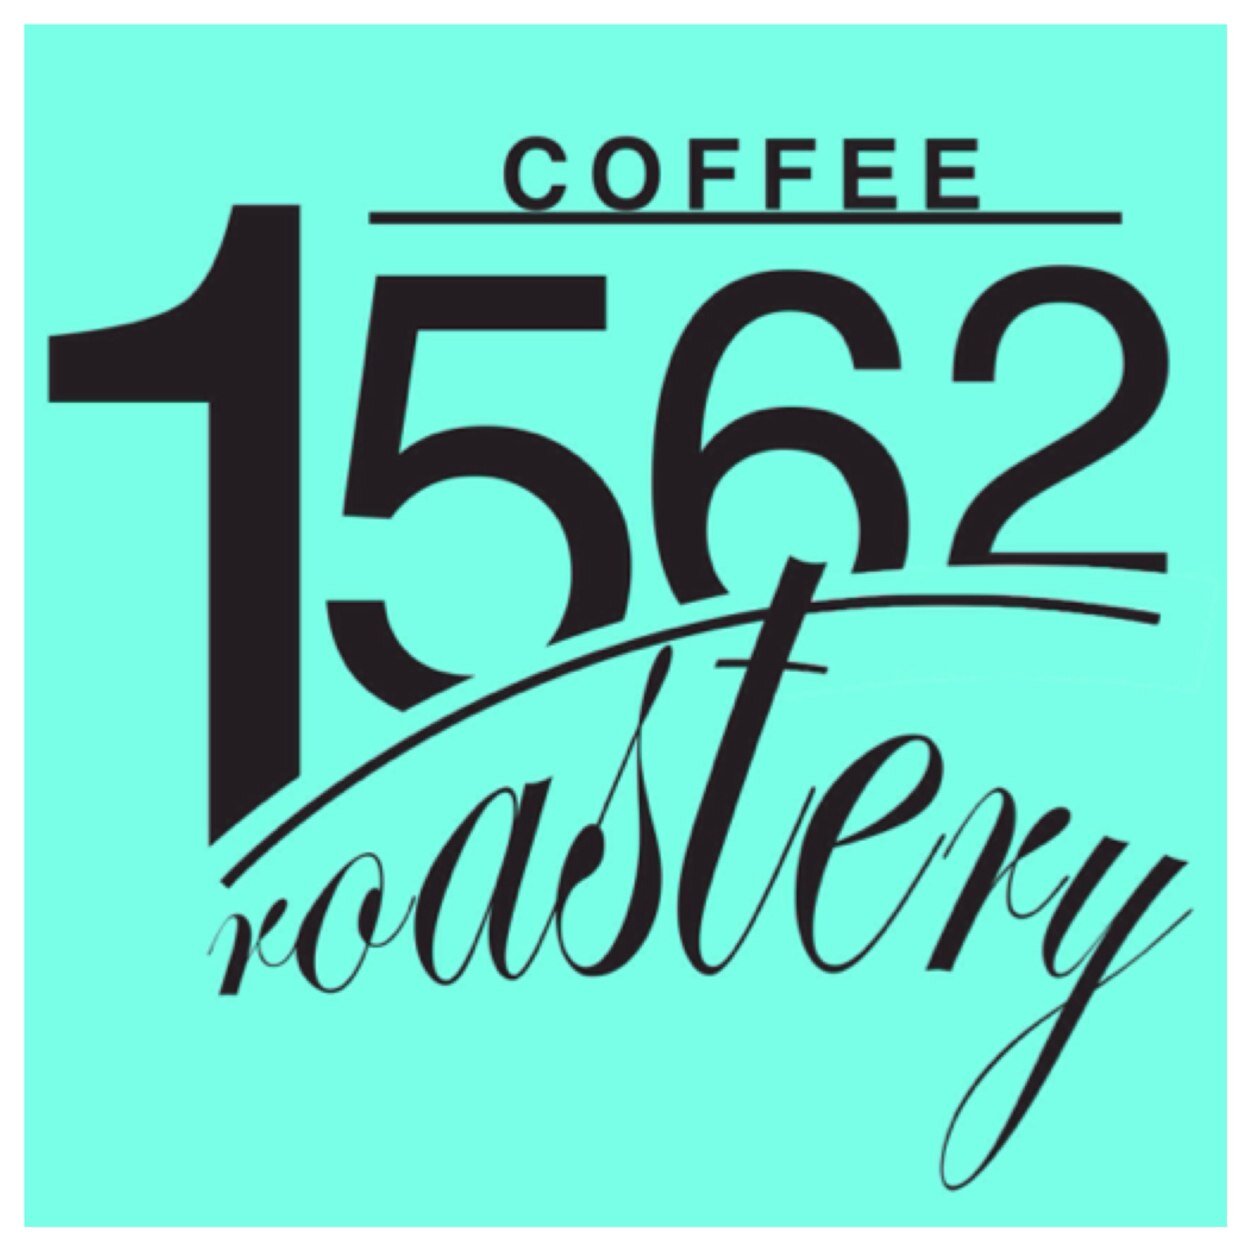 1562Roastery Profile Picture